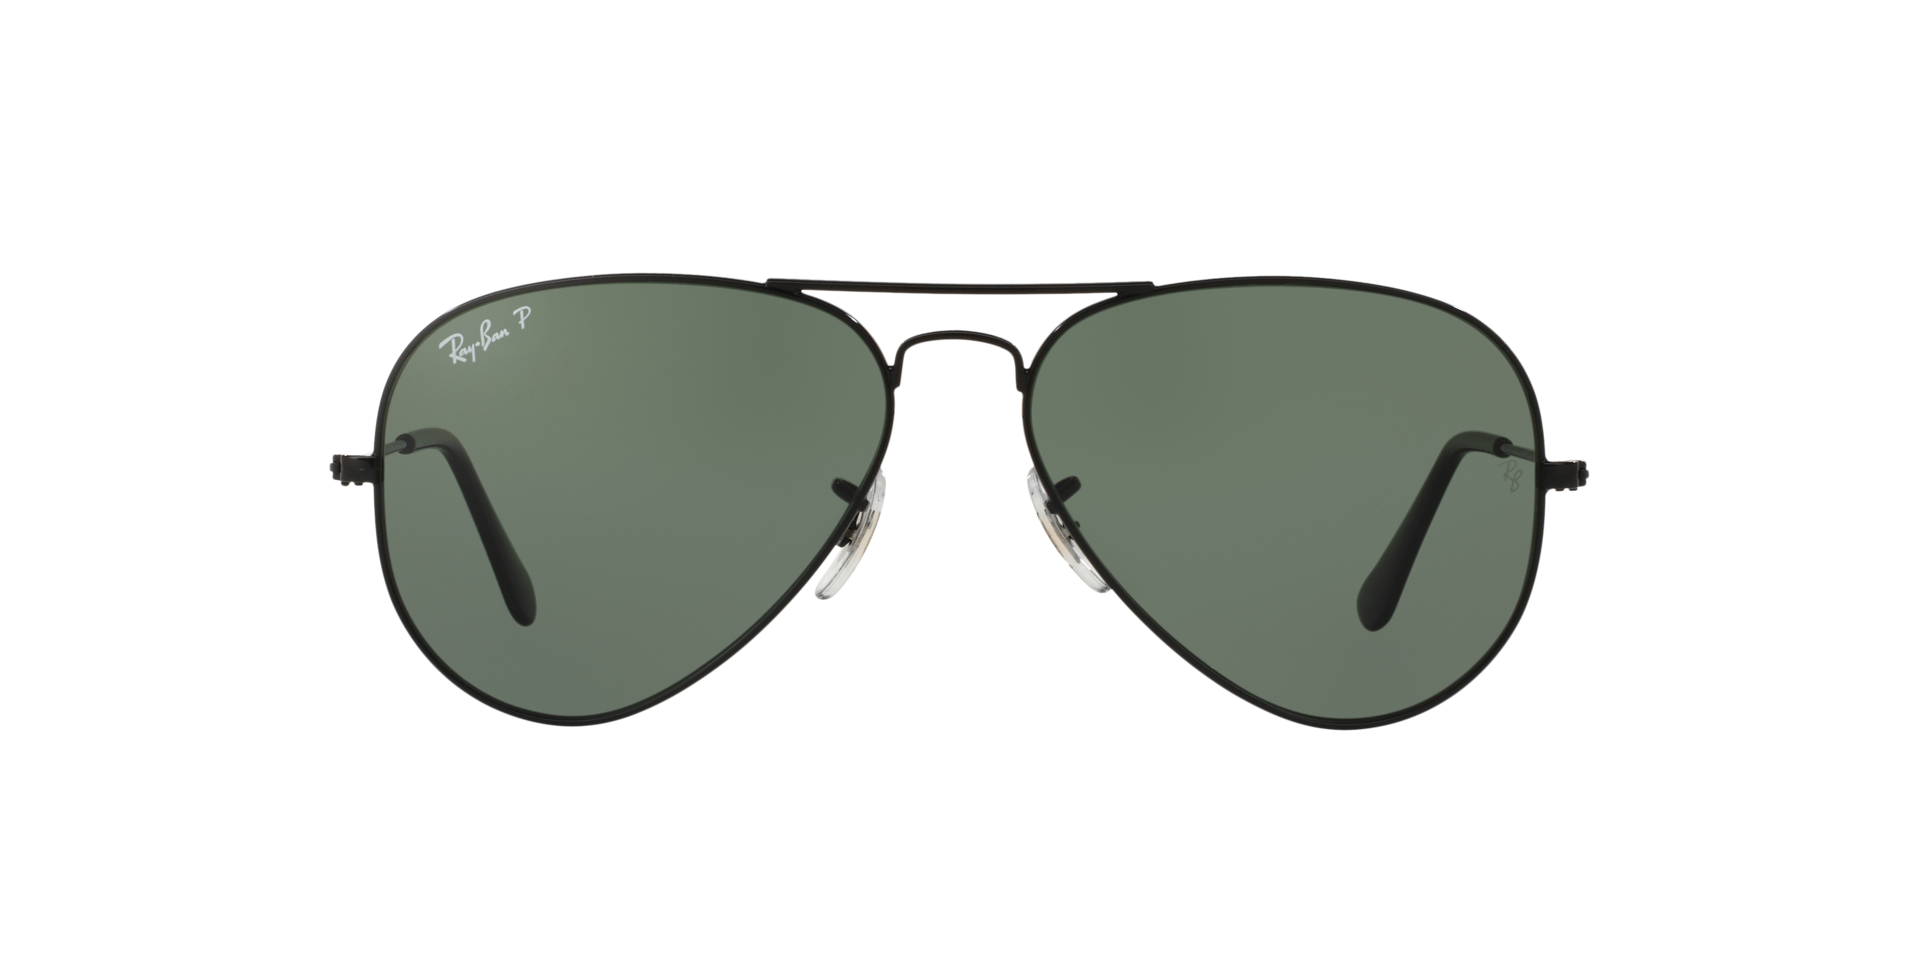 Ray-Ban Aviator Sunglasses - Matte Antique Black w/ Grey Mirror Silver -  Hole Out Golf Shop